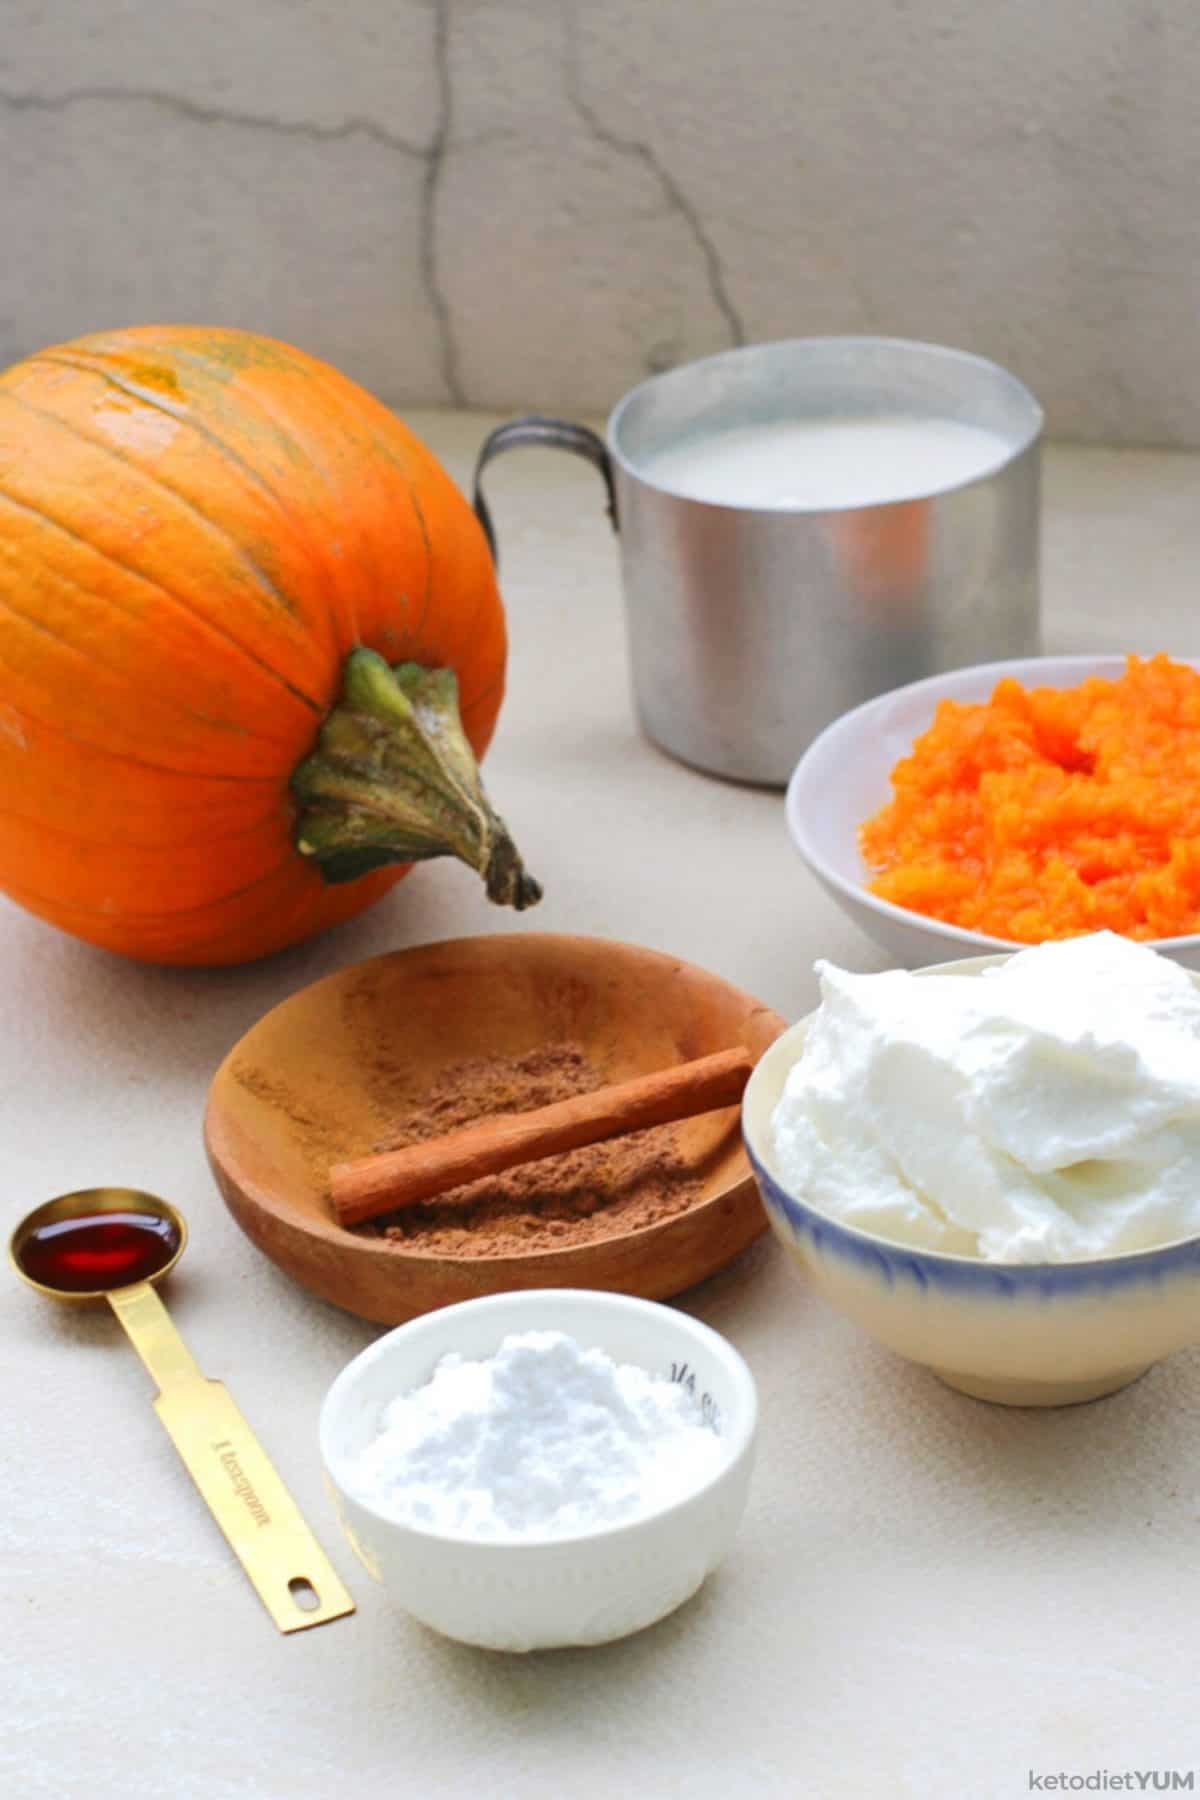 The simple ingredients you'll need to make low carb pumpkin mousse